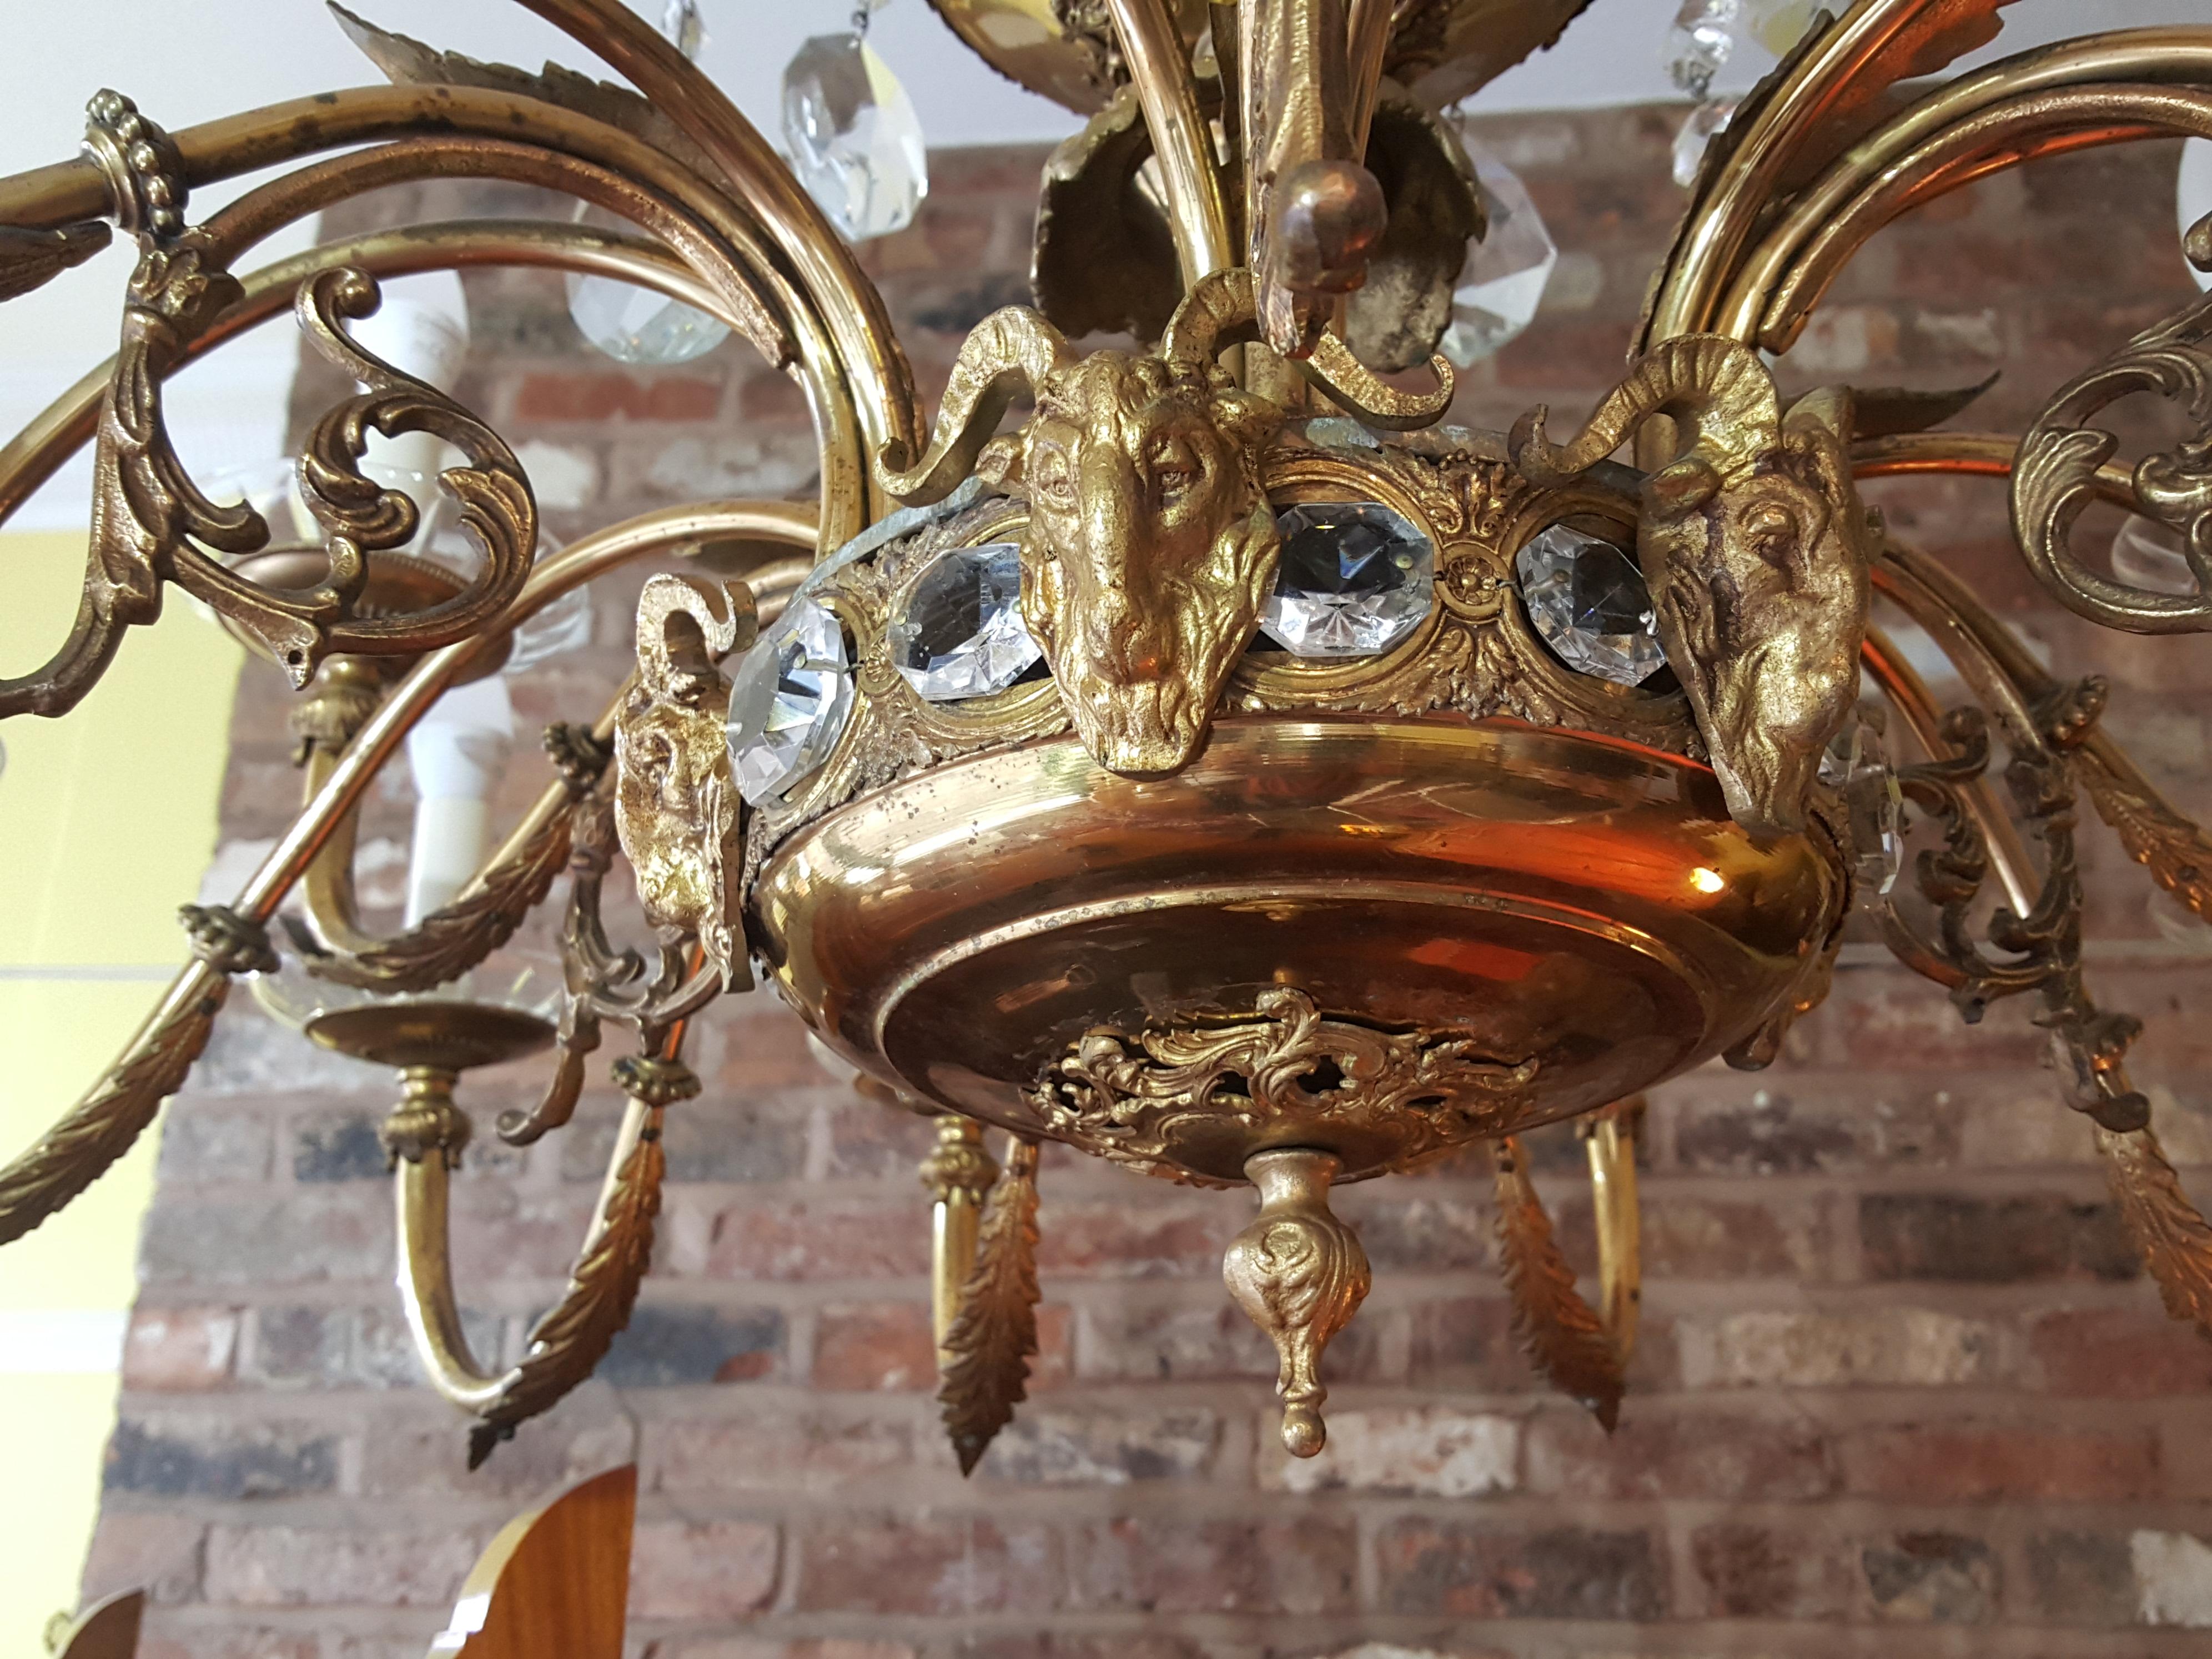 Early 20th century 18 light brass and crystal chandelier with Adam style ram’s head, rosette, and crystal decorations - all lights have been rewired and pat tested
Measures: 40